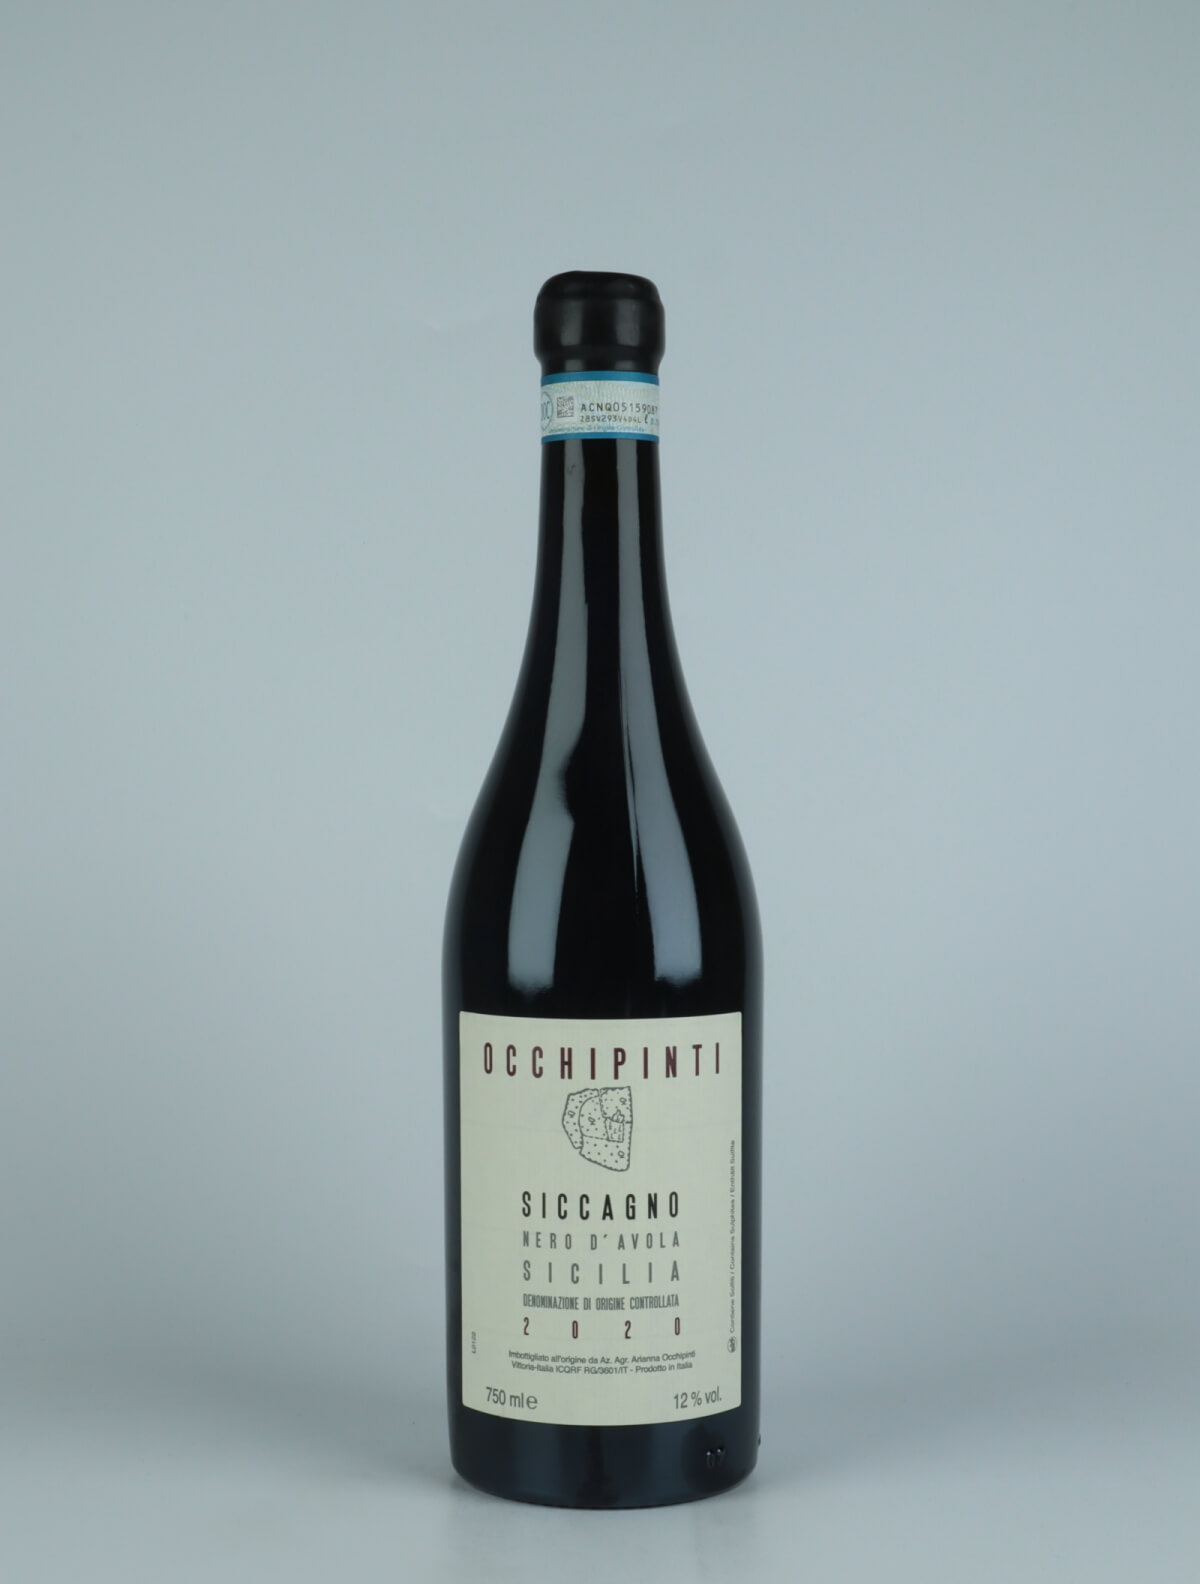 A bottle 2020 Siccagno Red wine from Arianna Occhipinti, Sicily in Italy